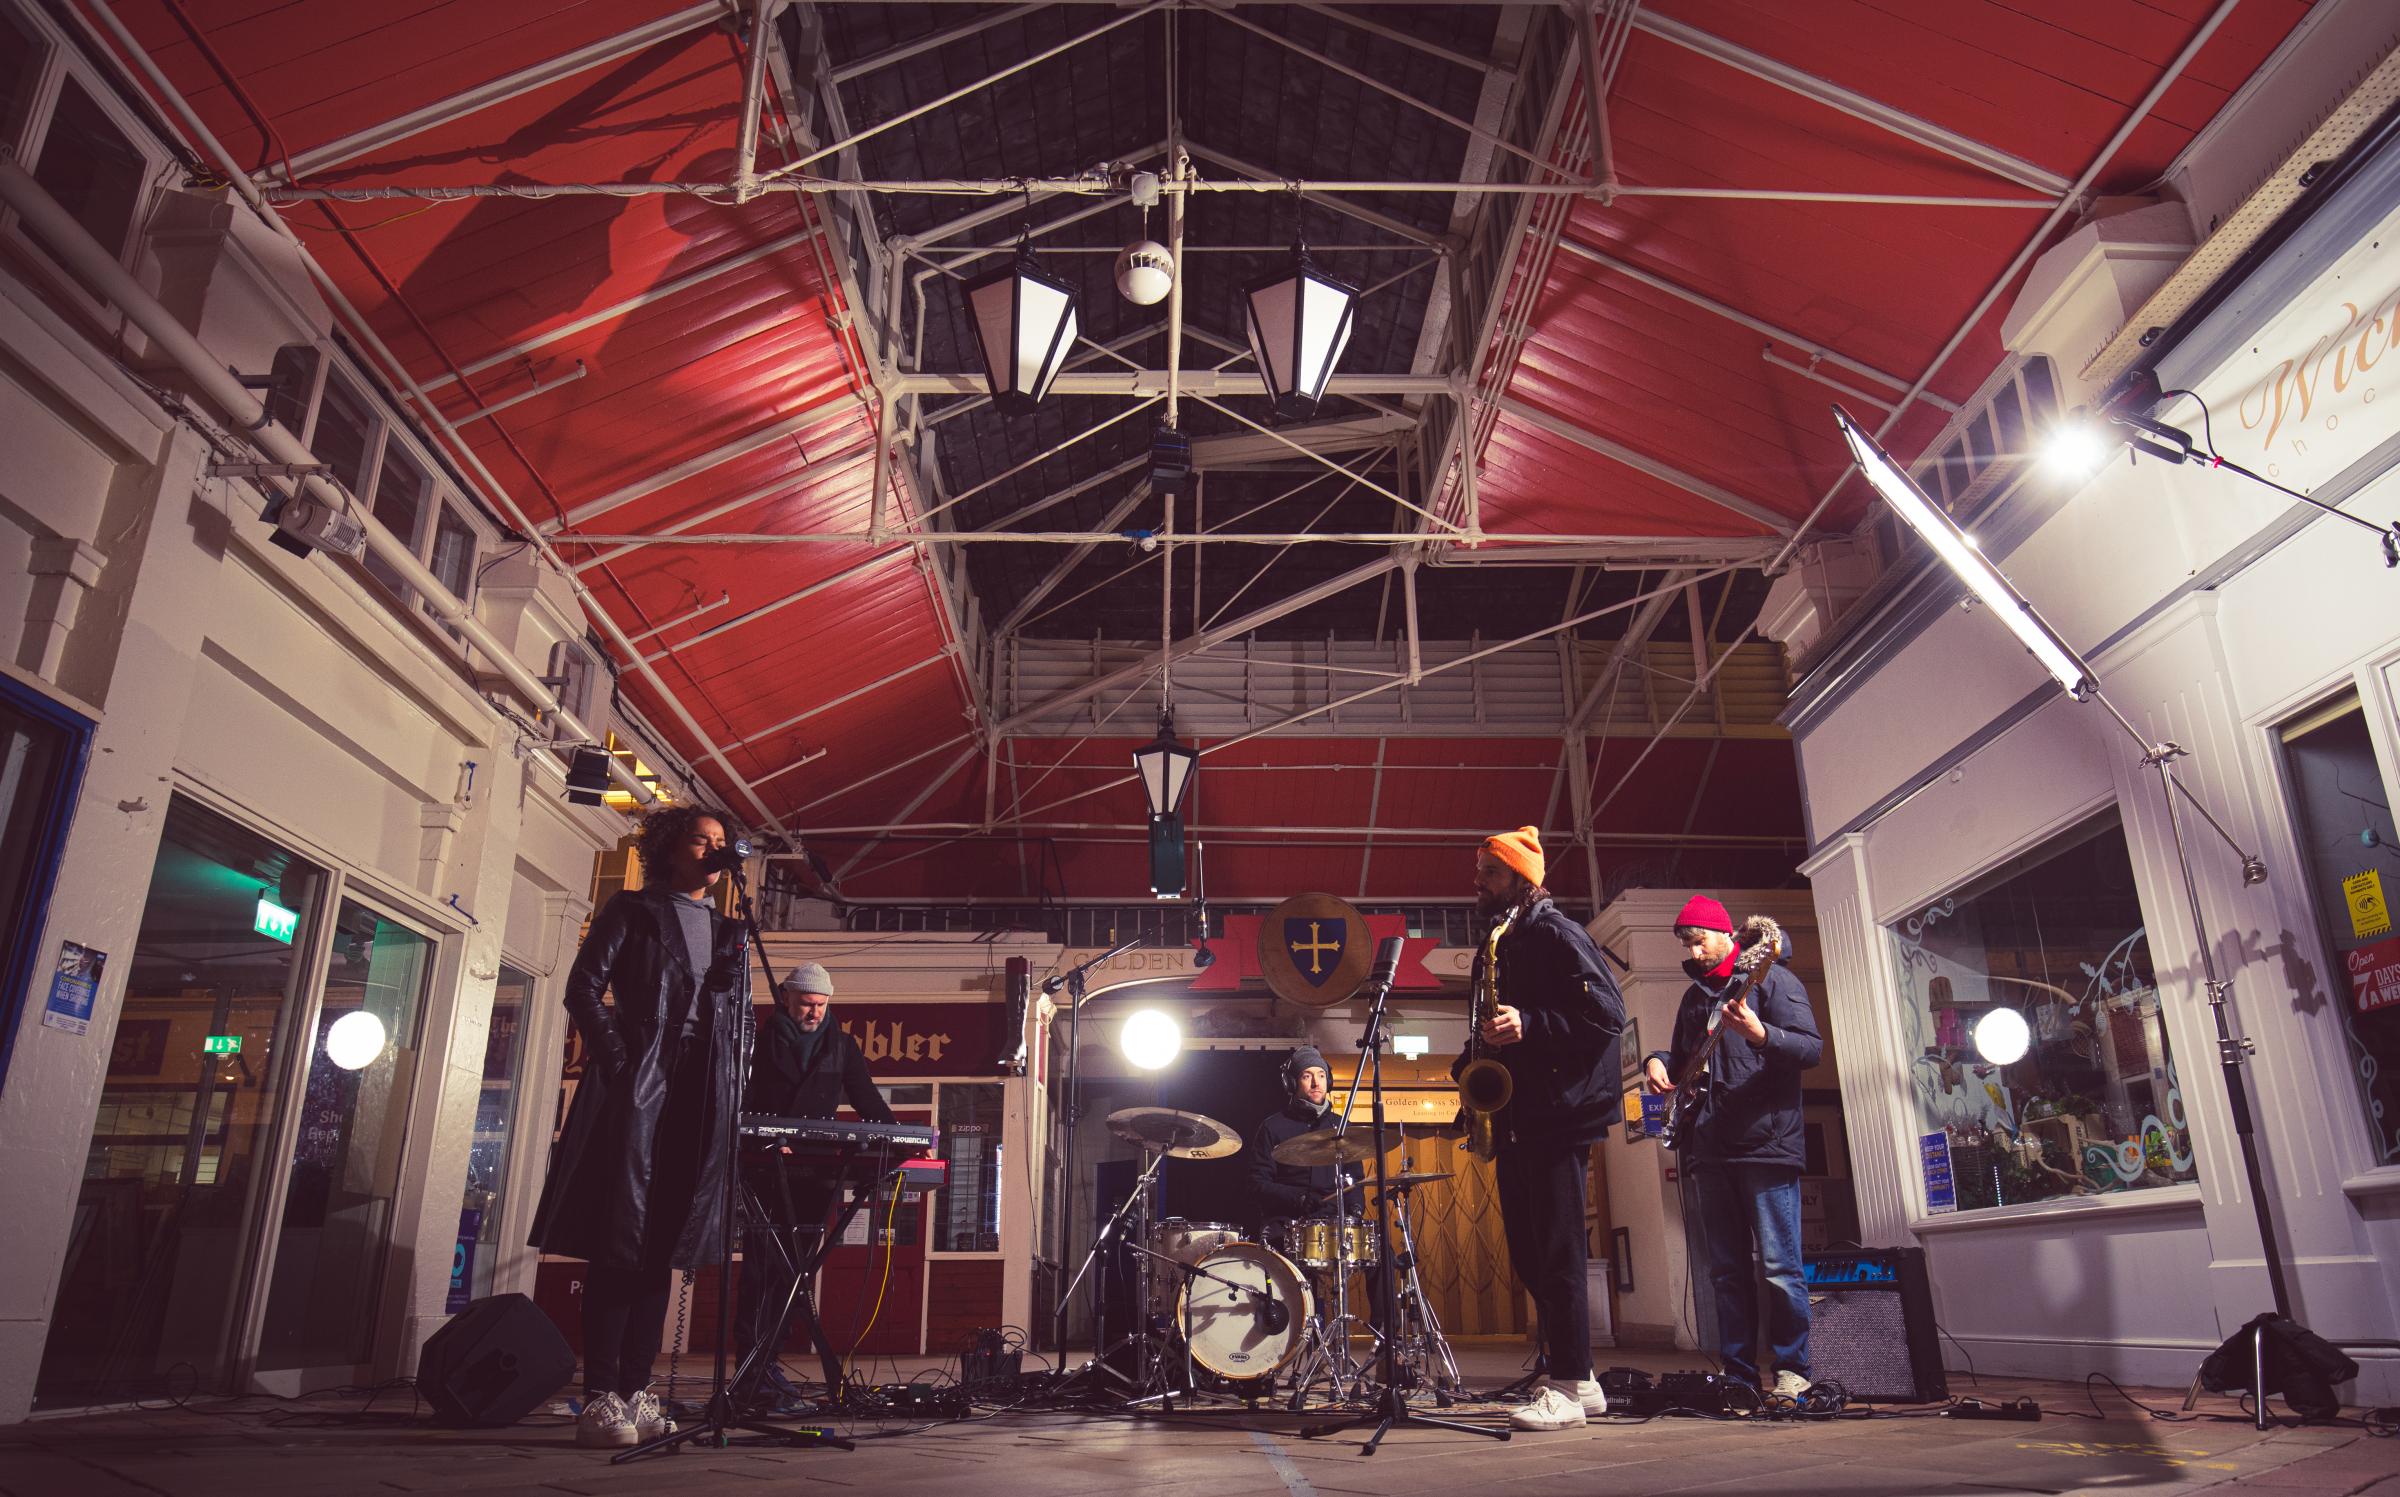 Upcycled Sounds and OCM are presenting the shows from Oxford Covered Market